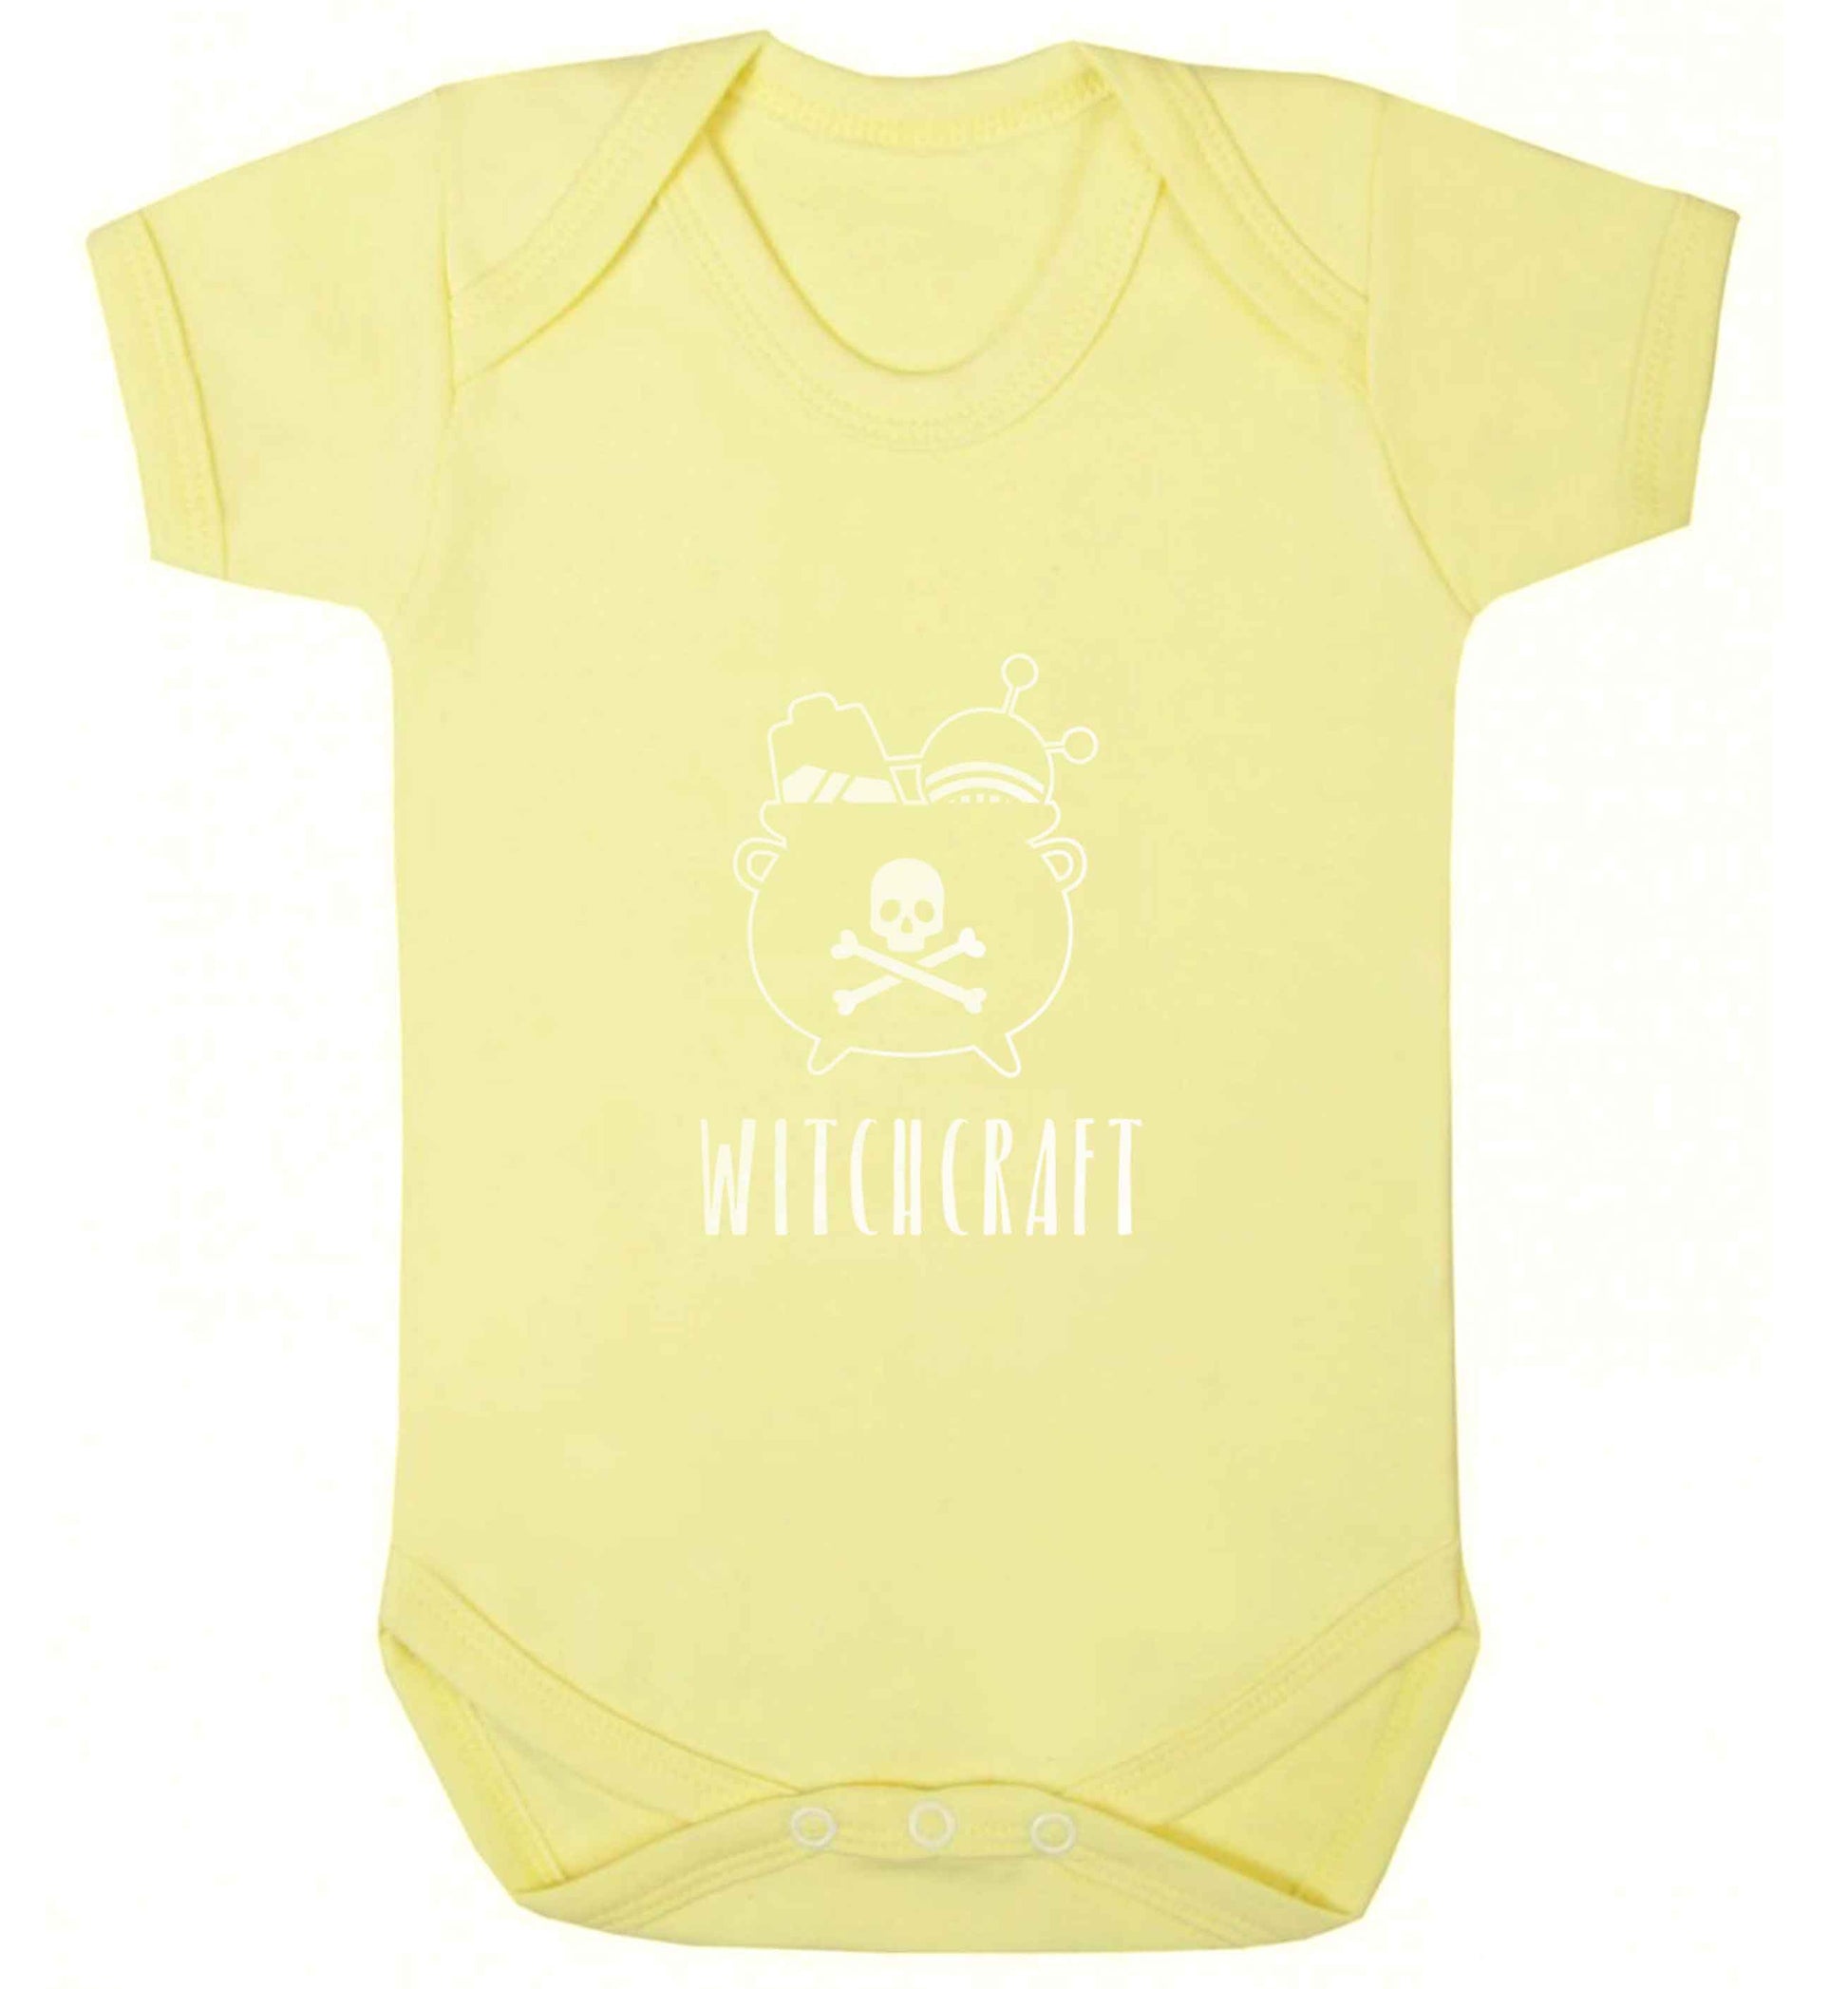 Witchcraft baby vest pale yellow 18-24 months